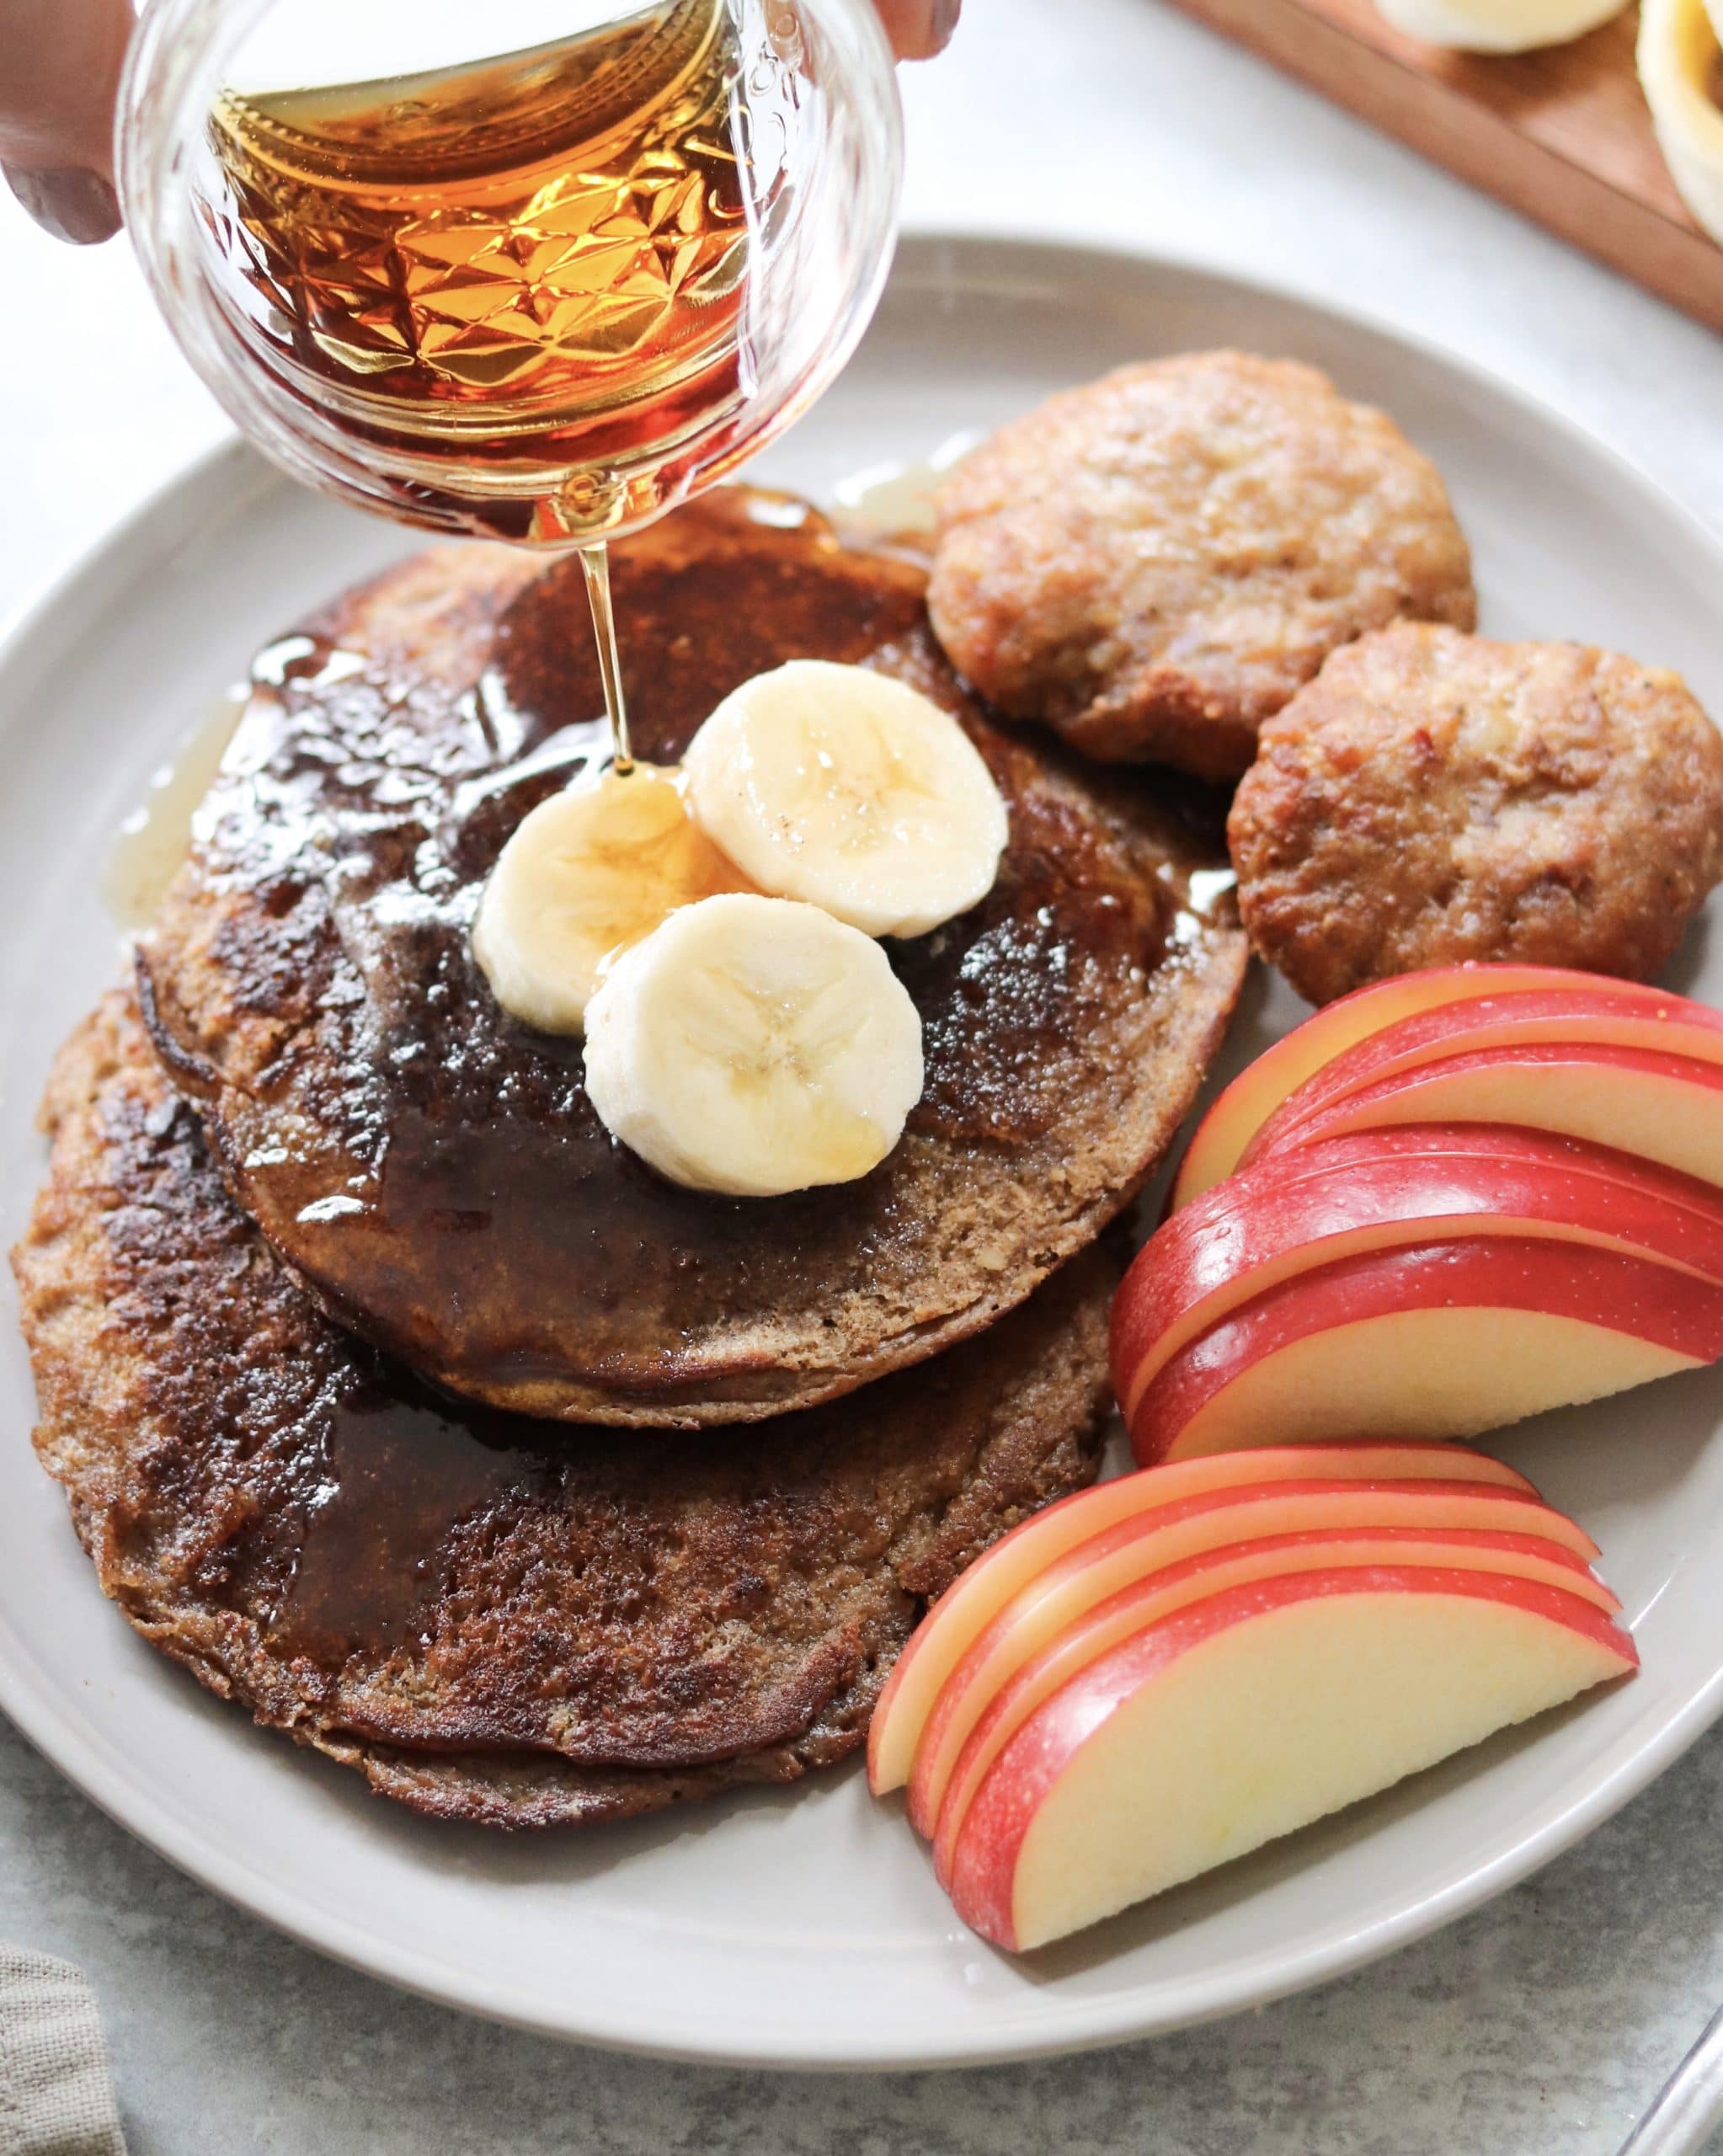 Syrup being poured over a plate of pancakes with apples and bananas